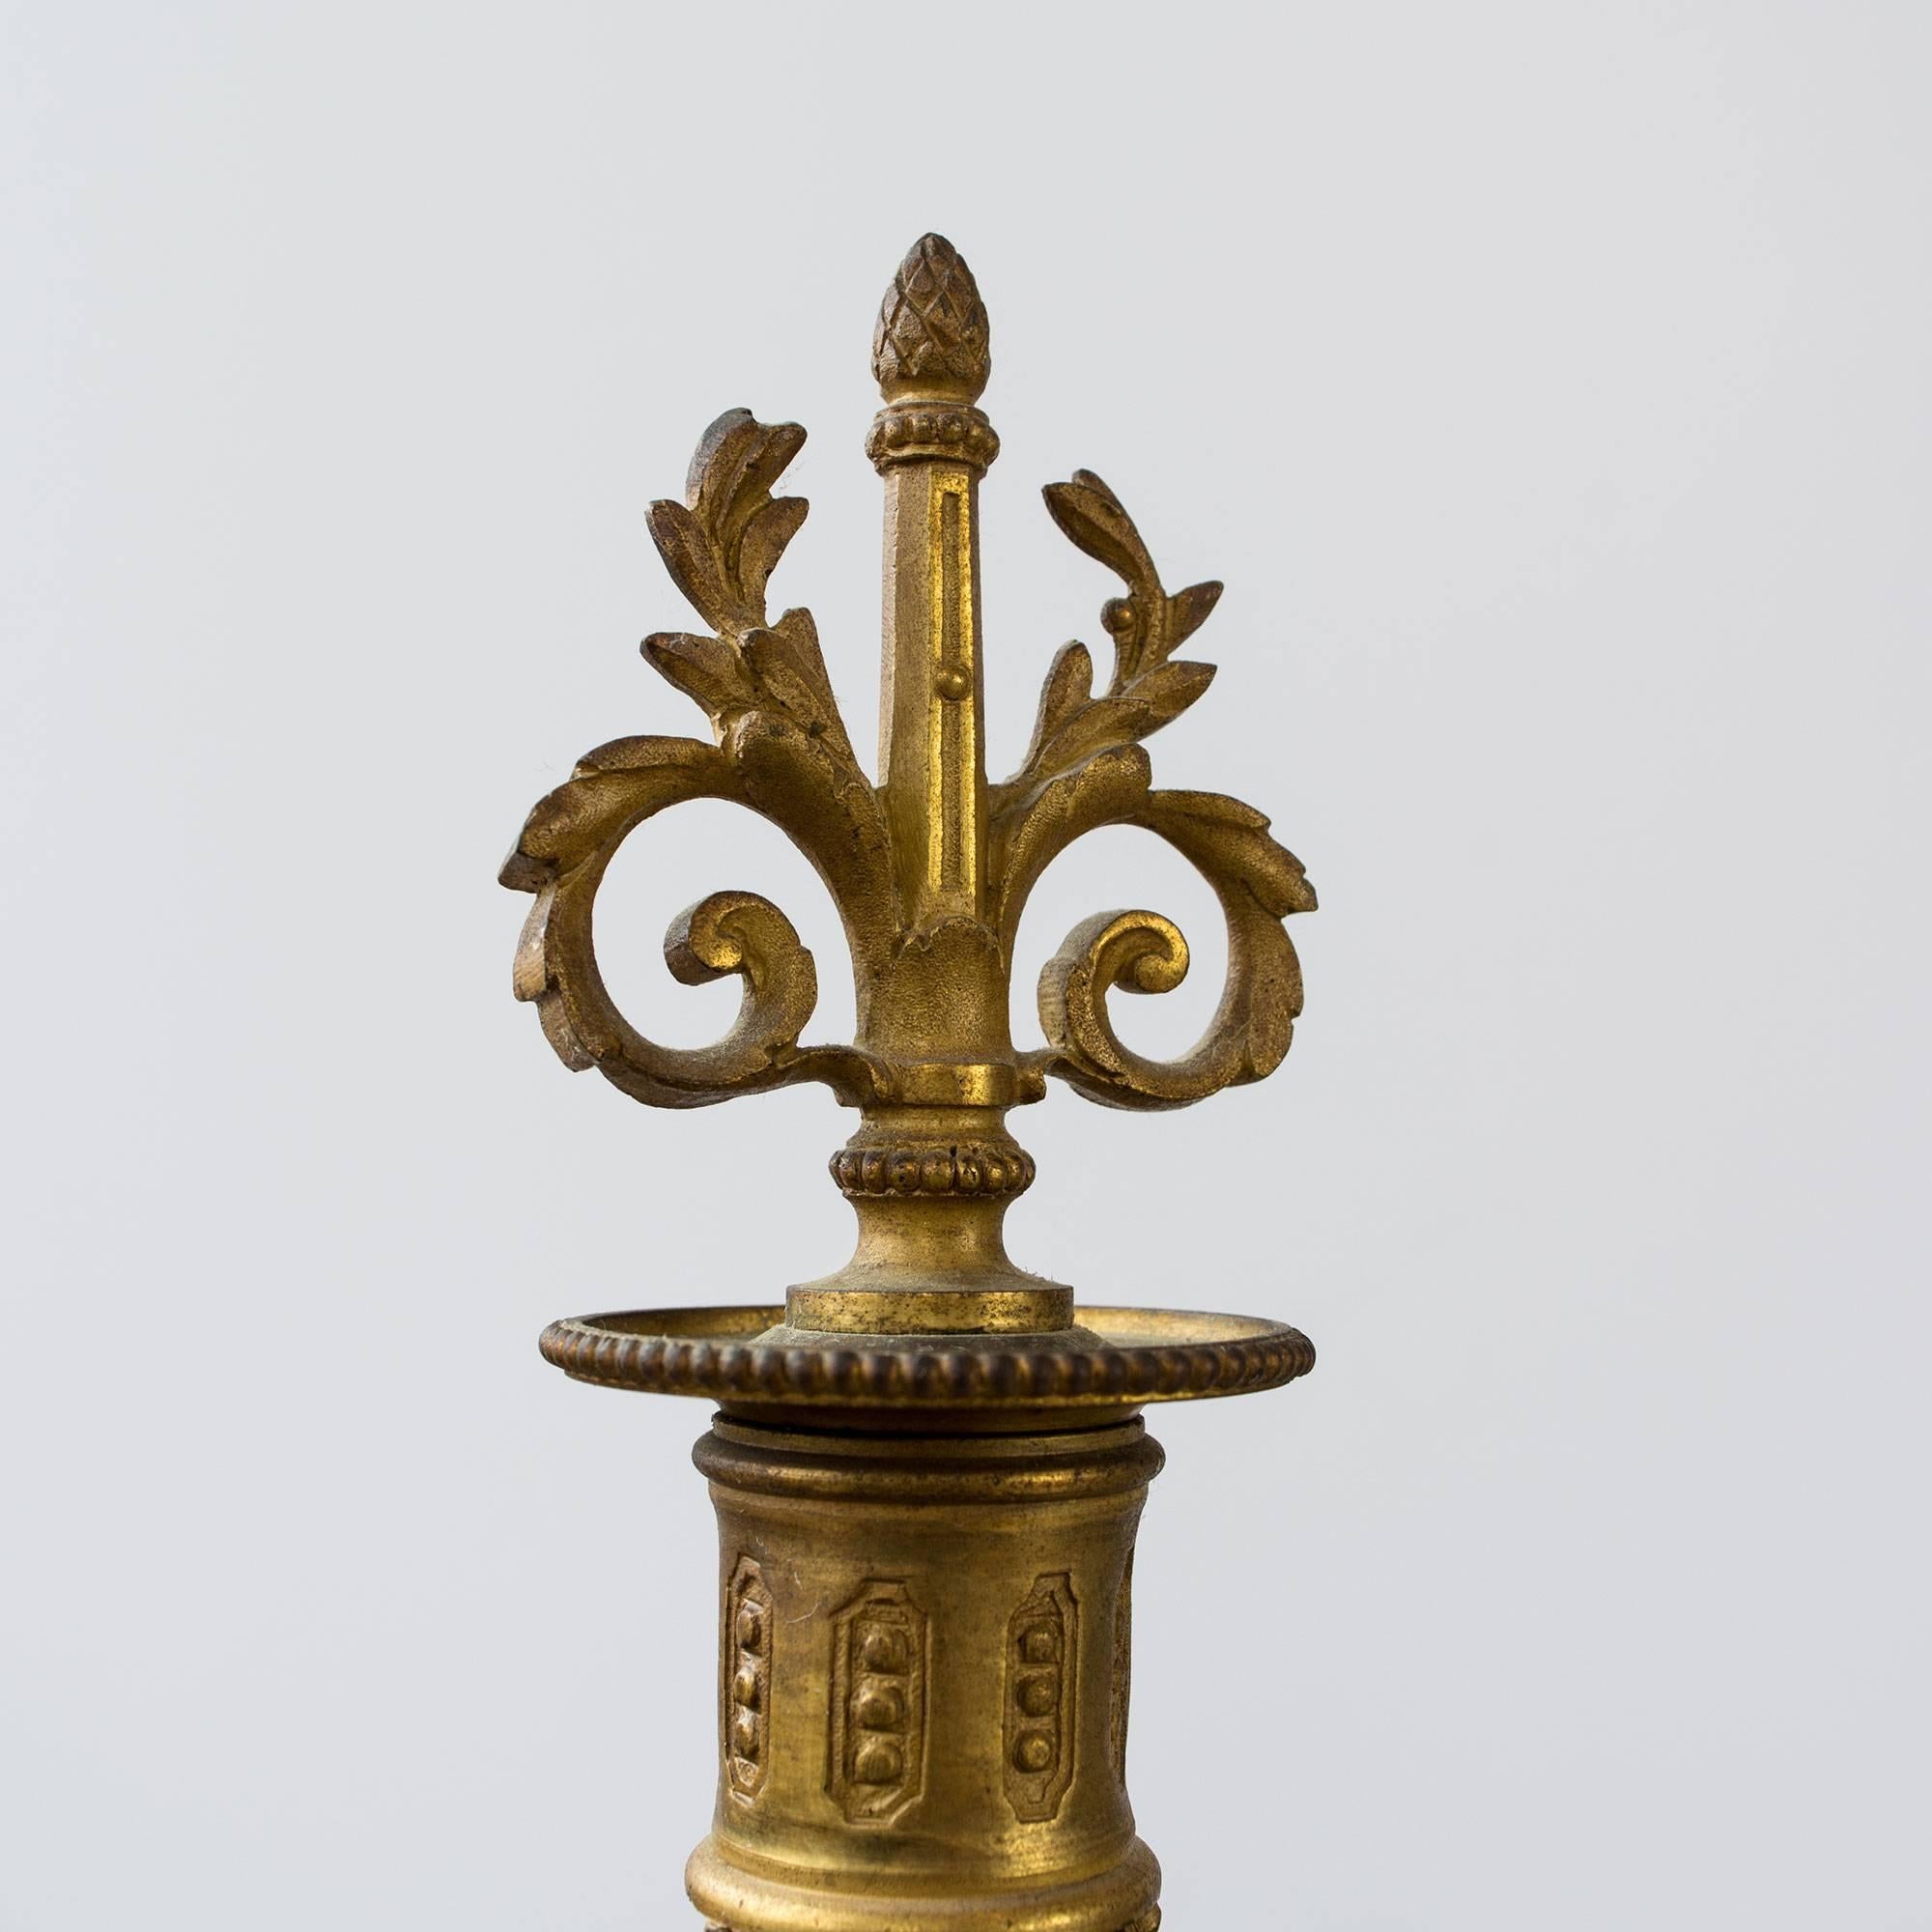 From the 19th century, a fabulous pair of six-arm with centre candle candelabra in Louis XVI style. Each arm adorned with beautifully detailed branches, acanthus leafs and aplenty of scrolls. There is a center urn adorned with bold lion faces,